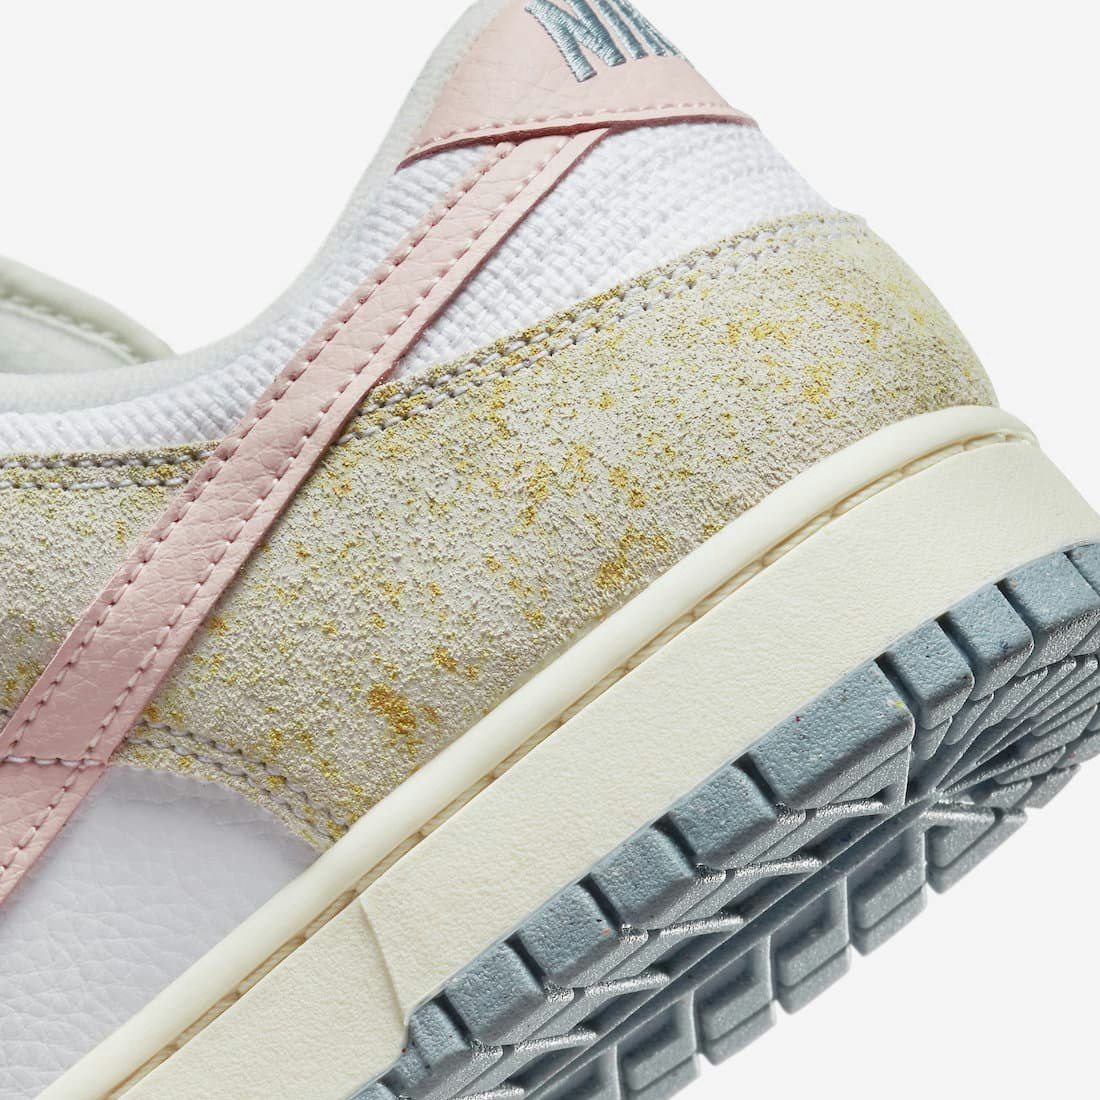 Nike Dunk Low "Suede Pastels"